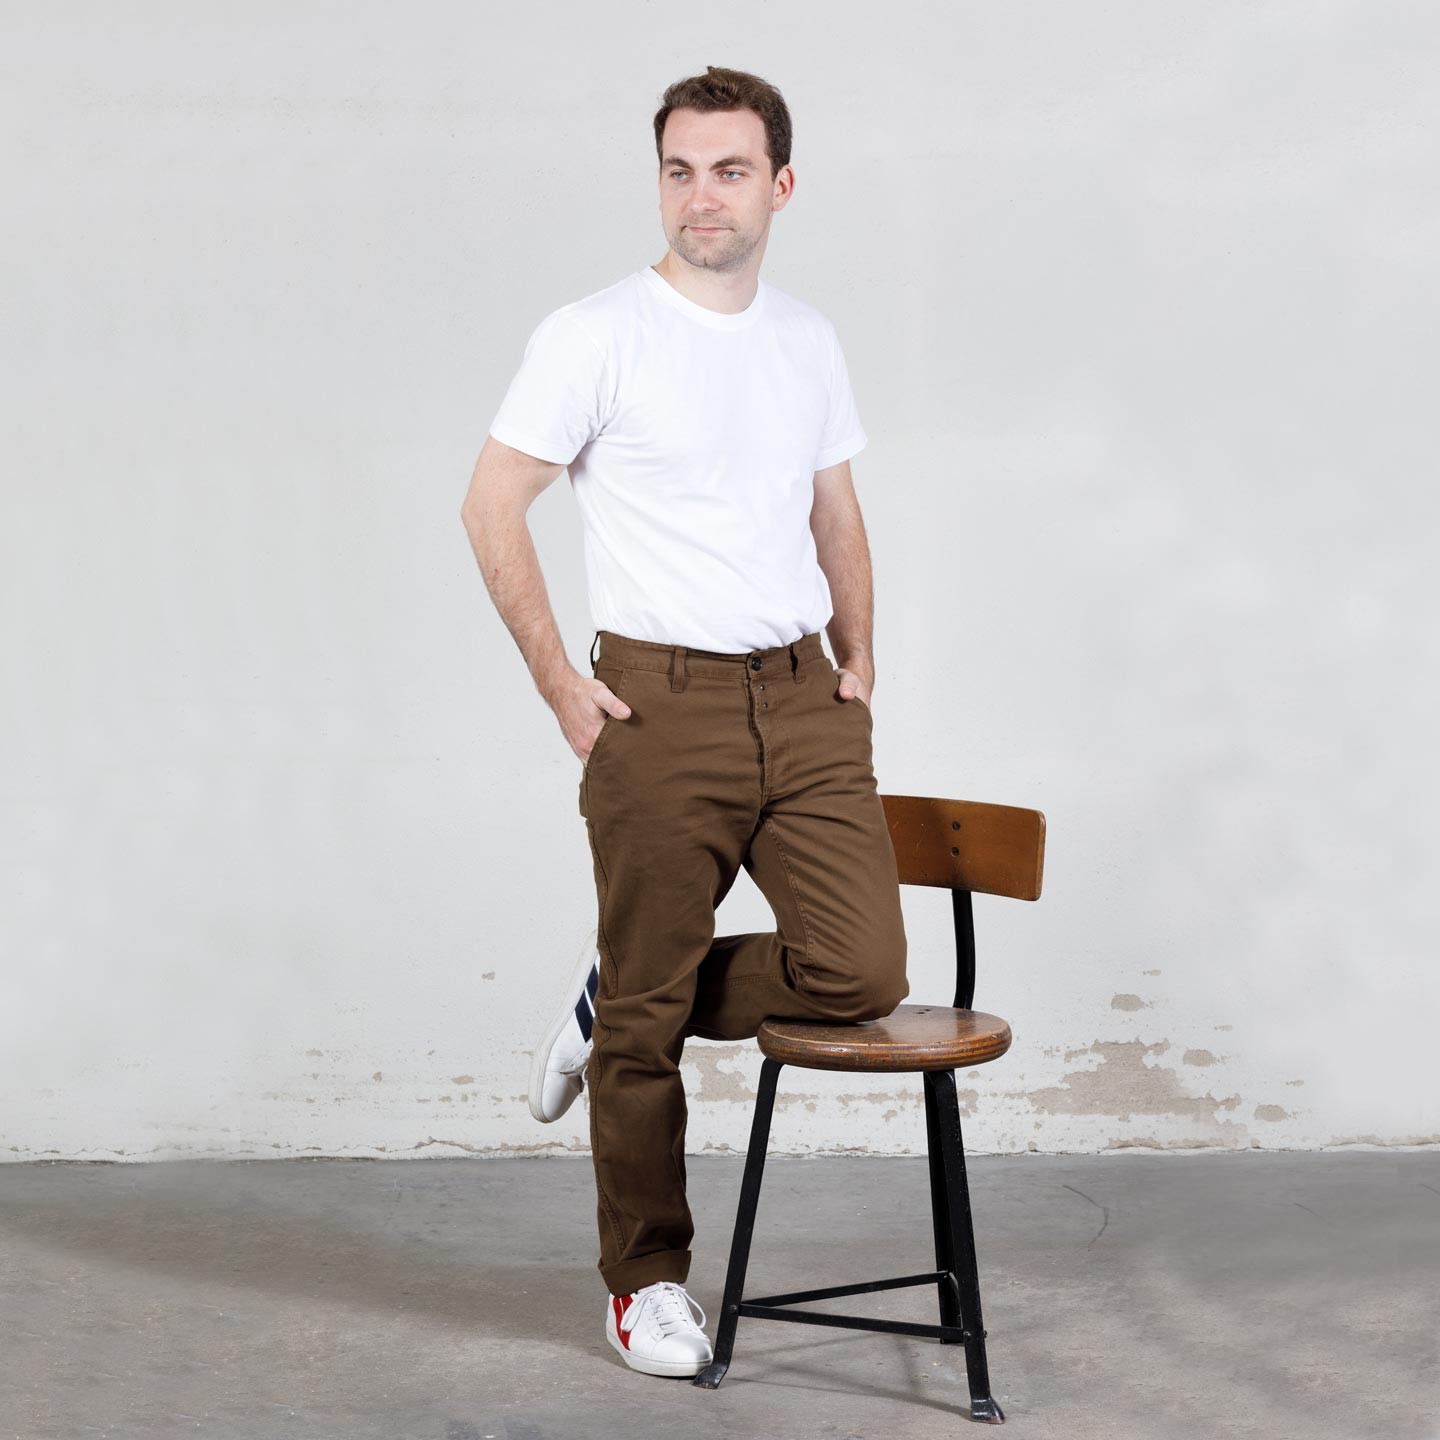 French workwear men's trousers - VETRA: 100% Made in France since 1927